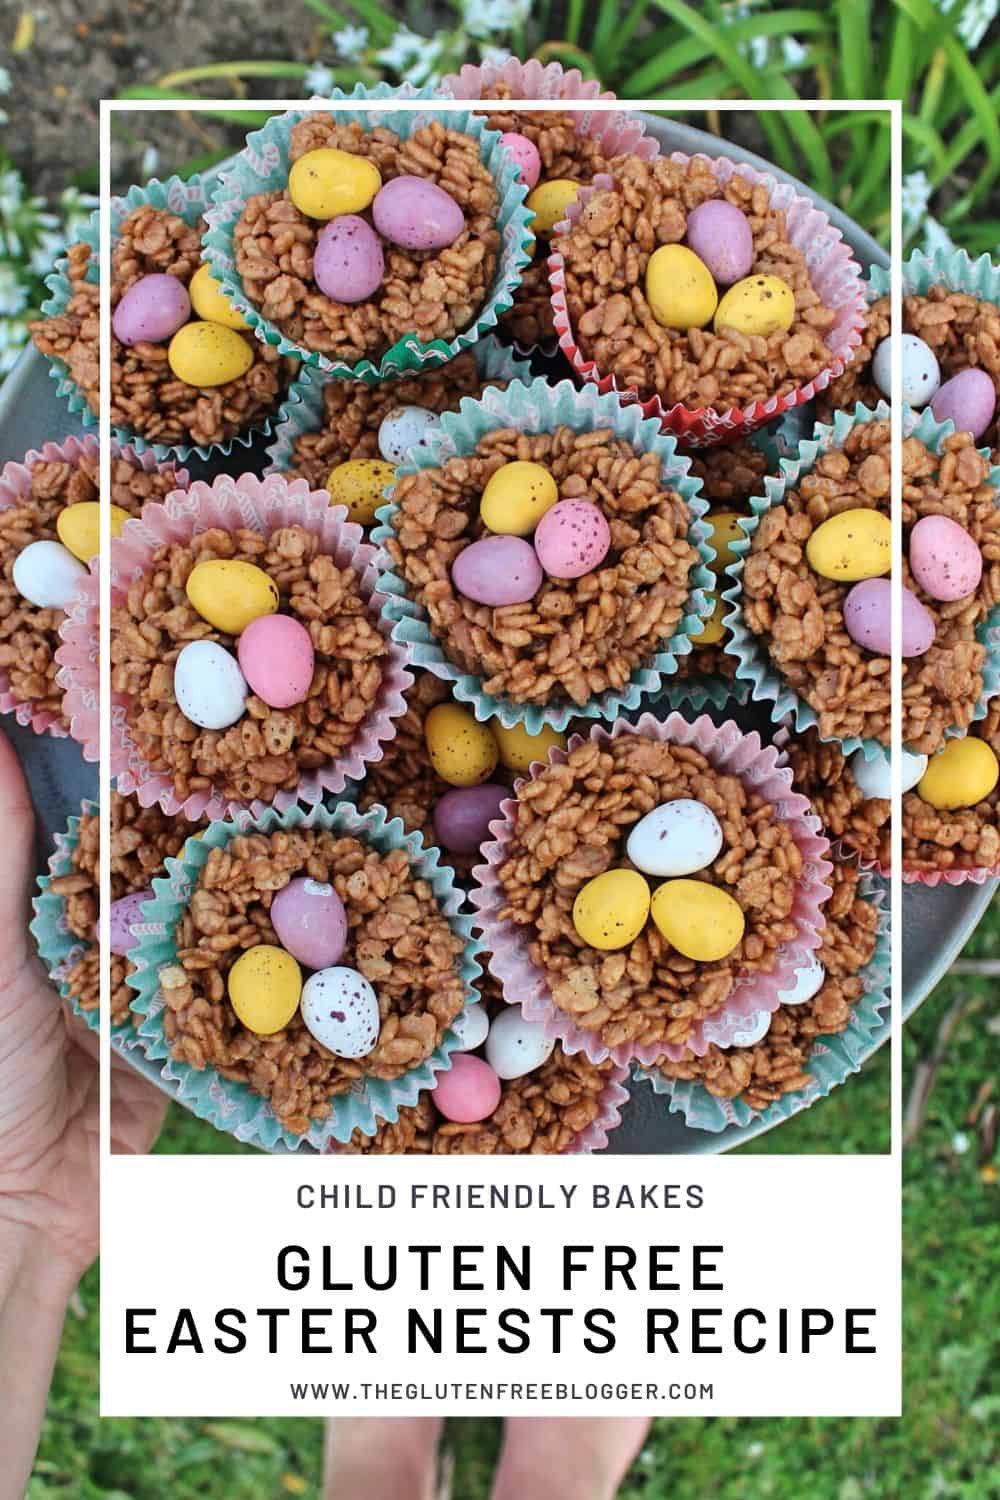 gluten free easter nests recipe easy child friendly no bake recipes (1)